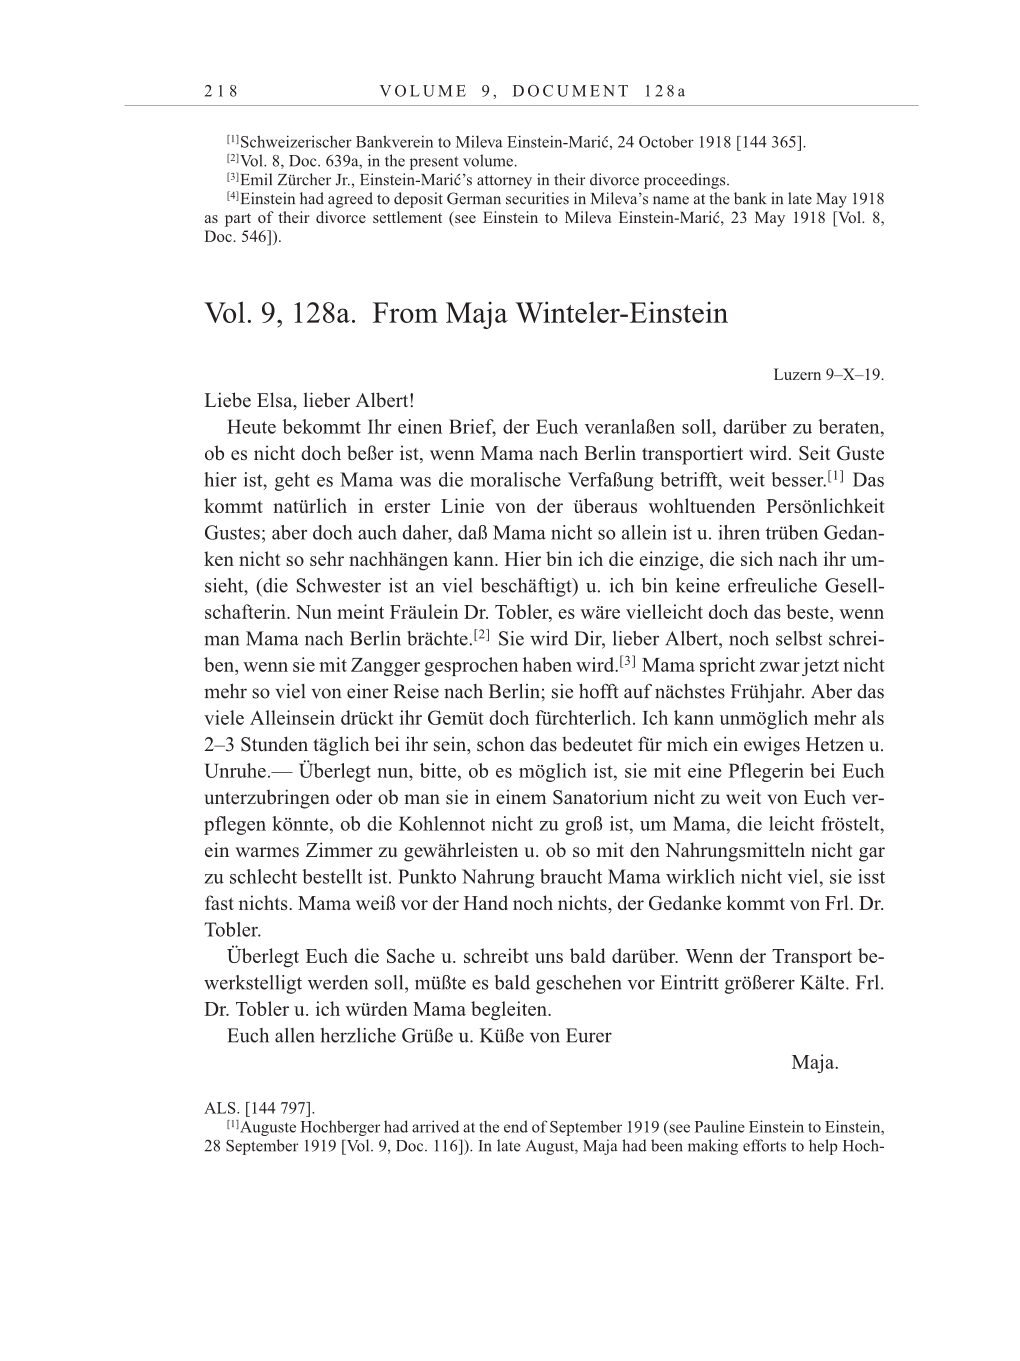 Volume 10: The Berlin Years: Correspondence May-December 1920 / Supplementary Correspondence 1909-1920 page 218